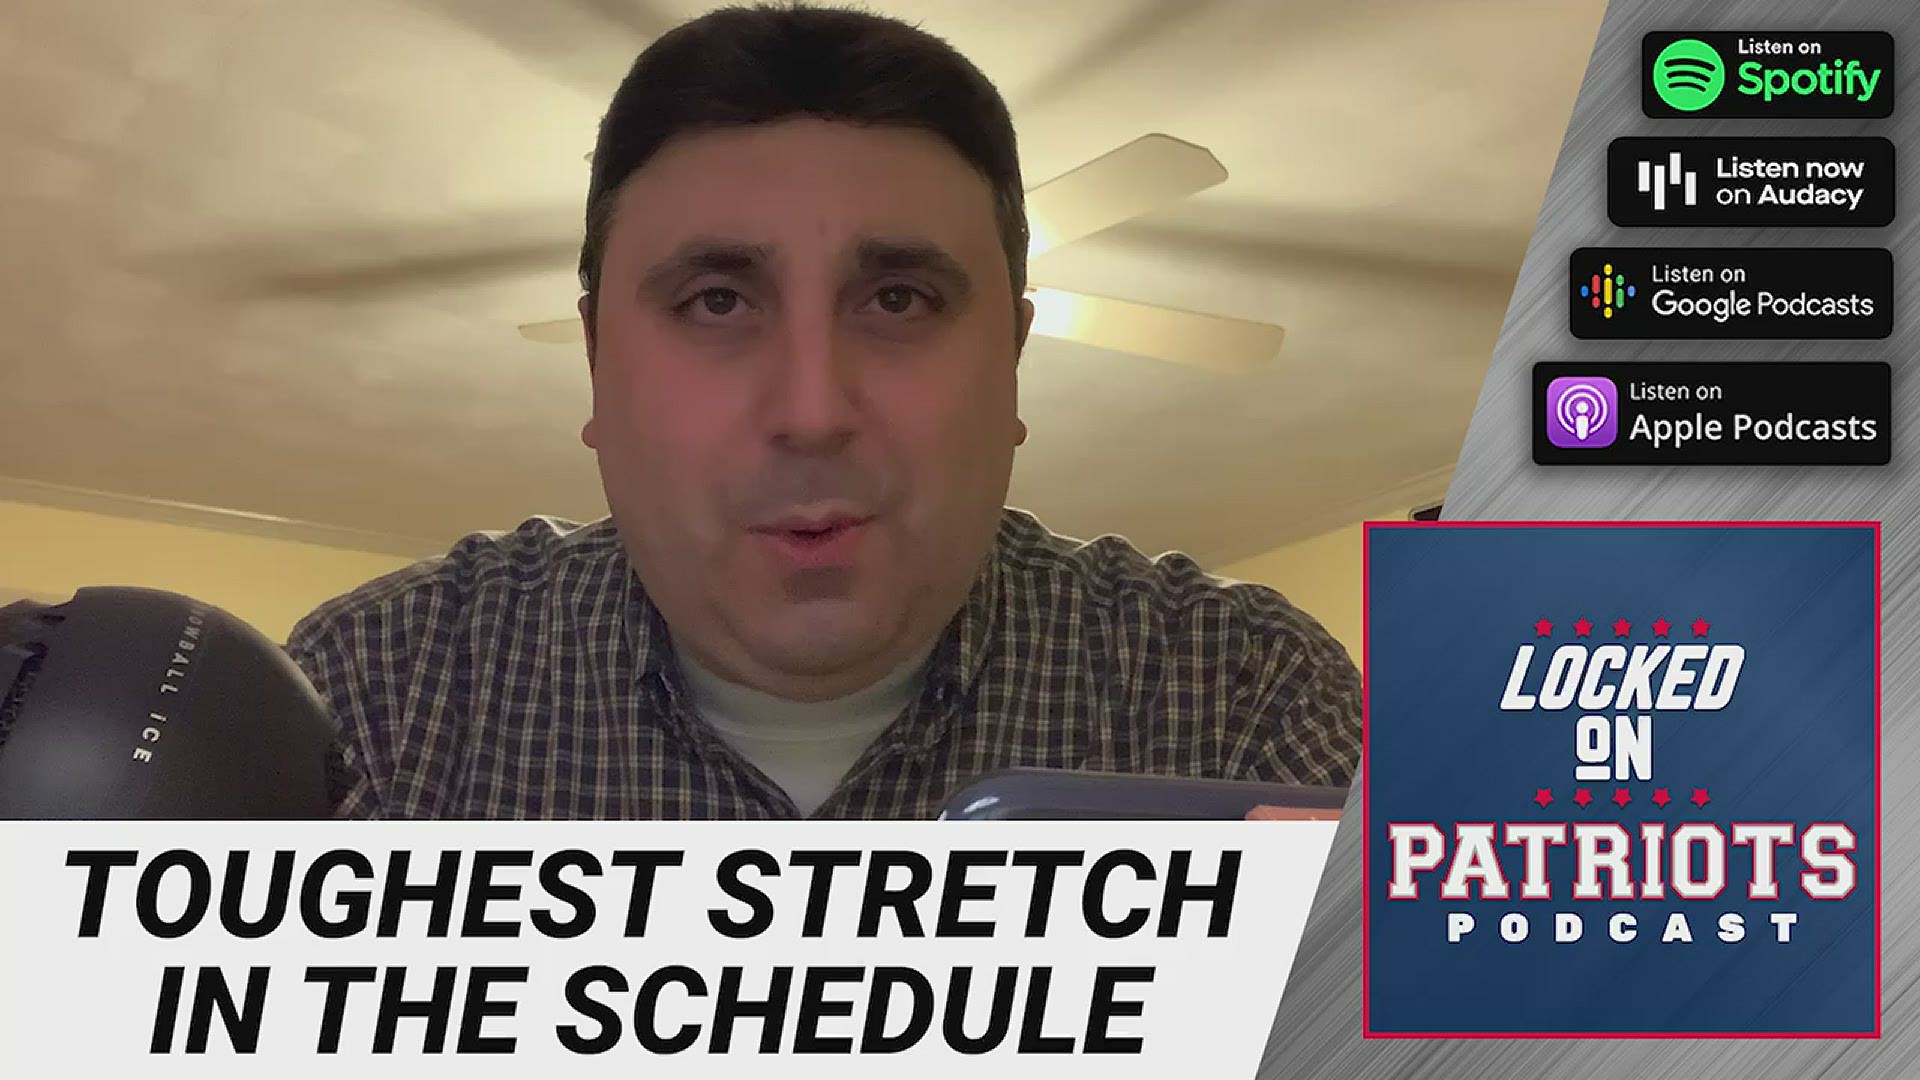 Mike D’Abate breaks down the intriguing matchups for the Patriots this season, including the Oct. 3 showdown between the Pats and their former QB, Tom Brady